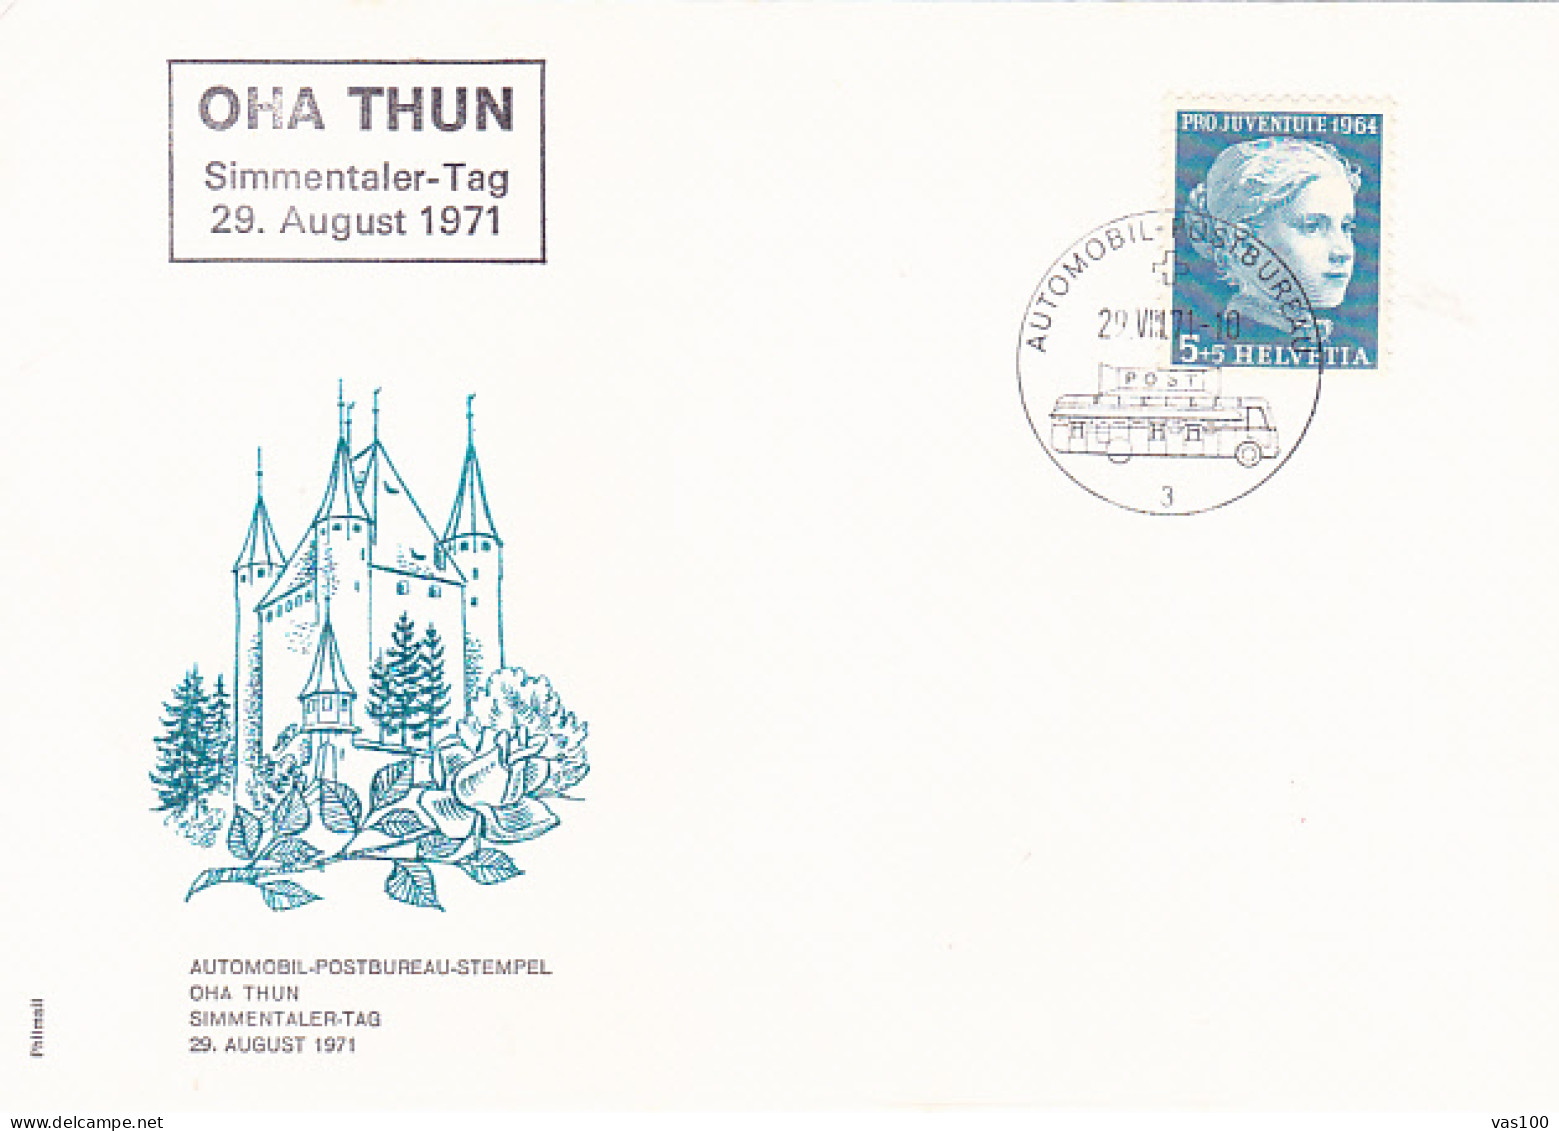 TRANSPORT, BUSS, MOBILE POST OFFICE POSTAMRK ON THUN EXHIBITION SPECIAL COVER, 1971, SWITZERLAND - Busses